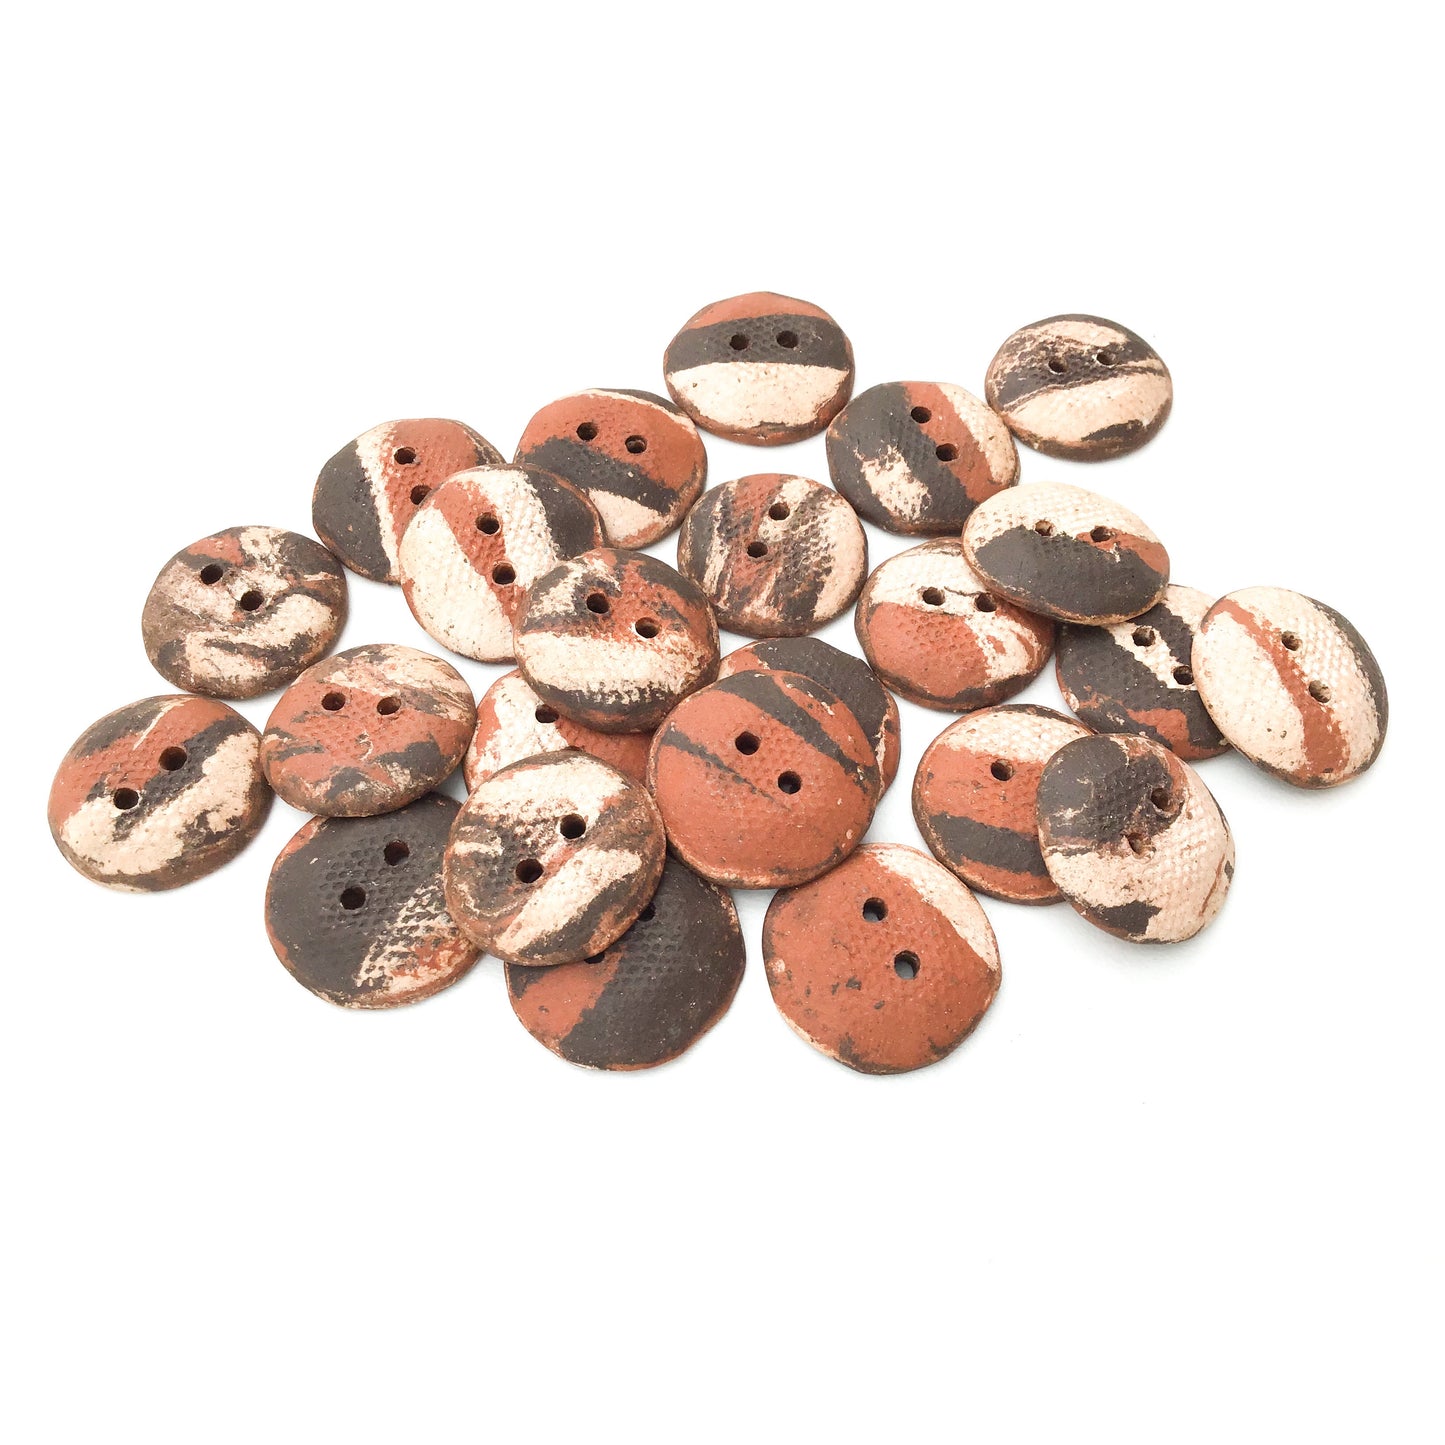 Raw and Rustic Tri-Colored Ceramic Buttons - Earthy Clay Buttons - 3/4" to 7/8"